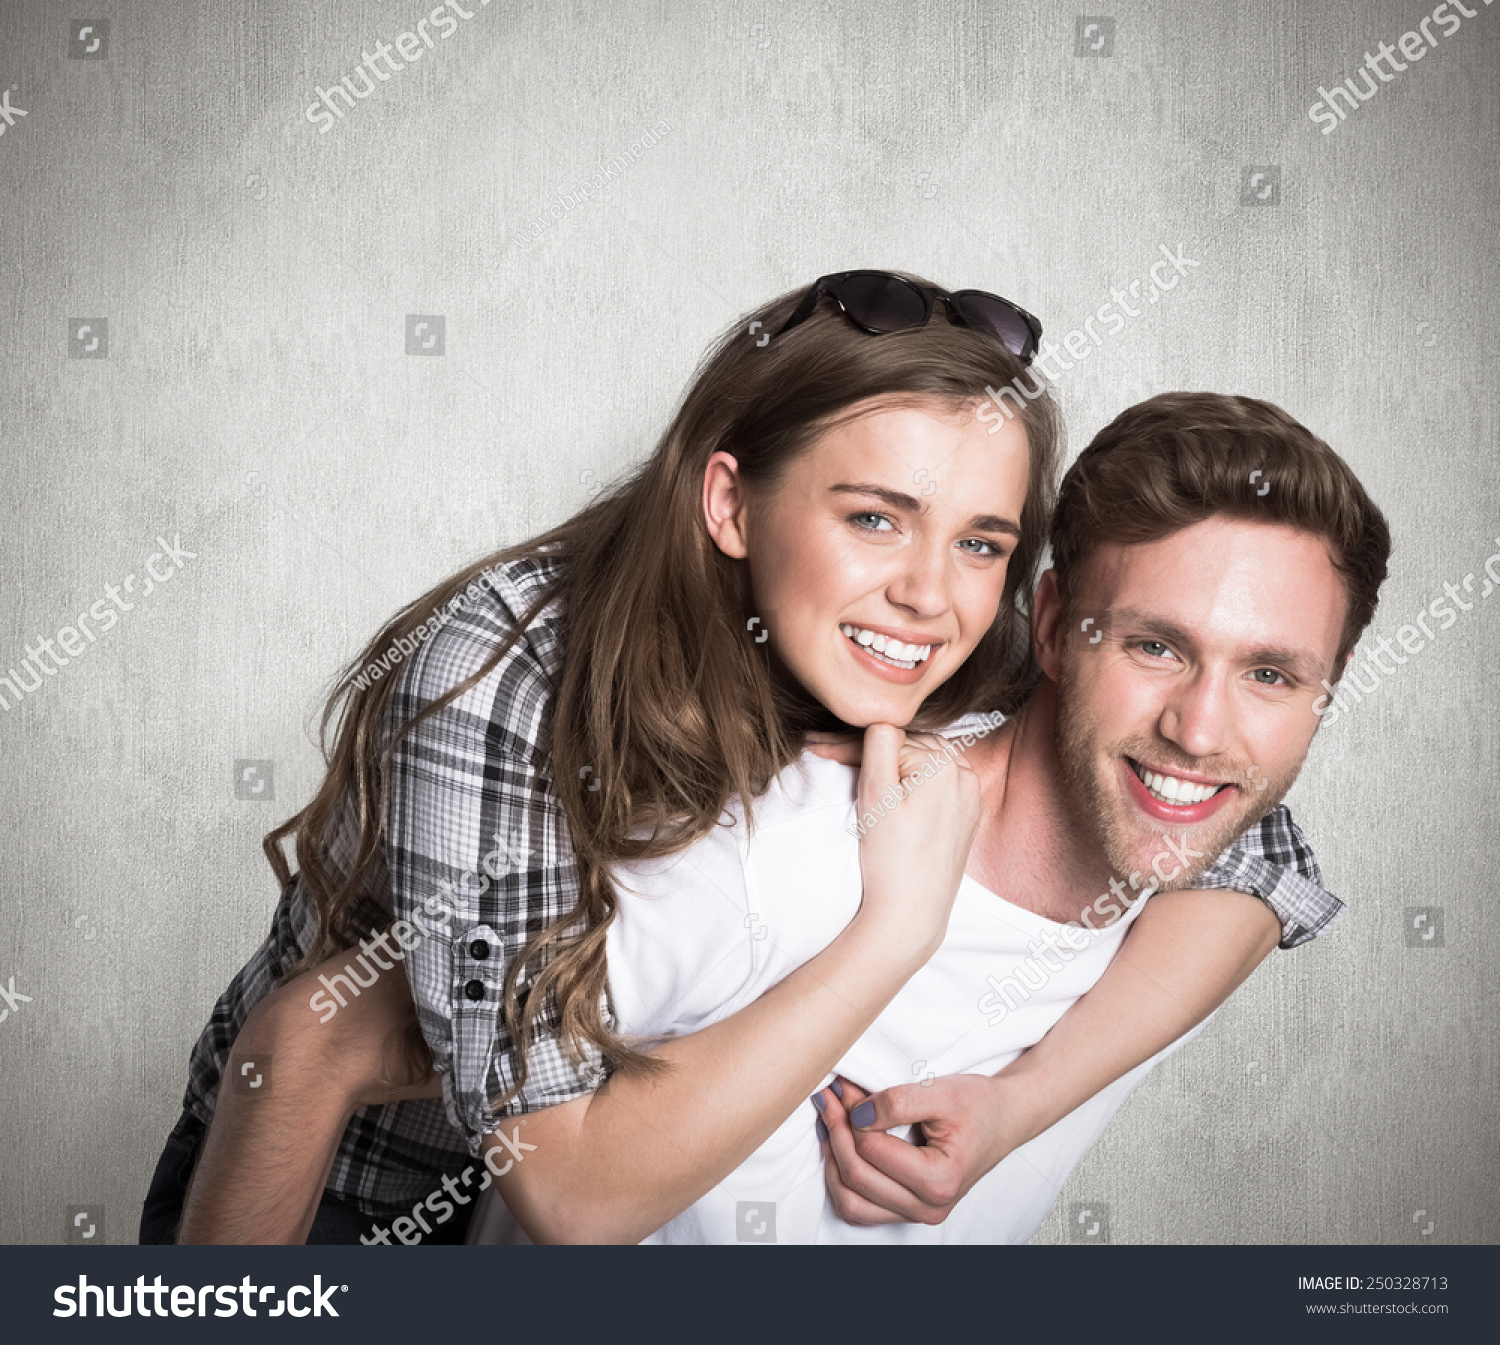 Portrait Smiling Man Carrying Woman Against Stock Photo 250328713 ...